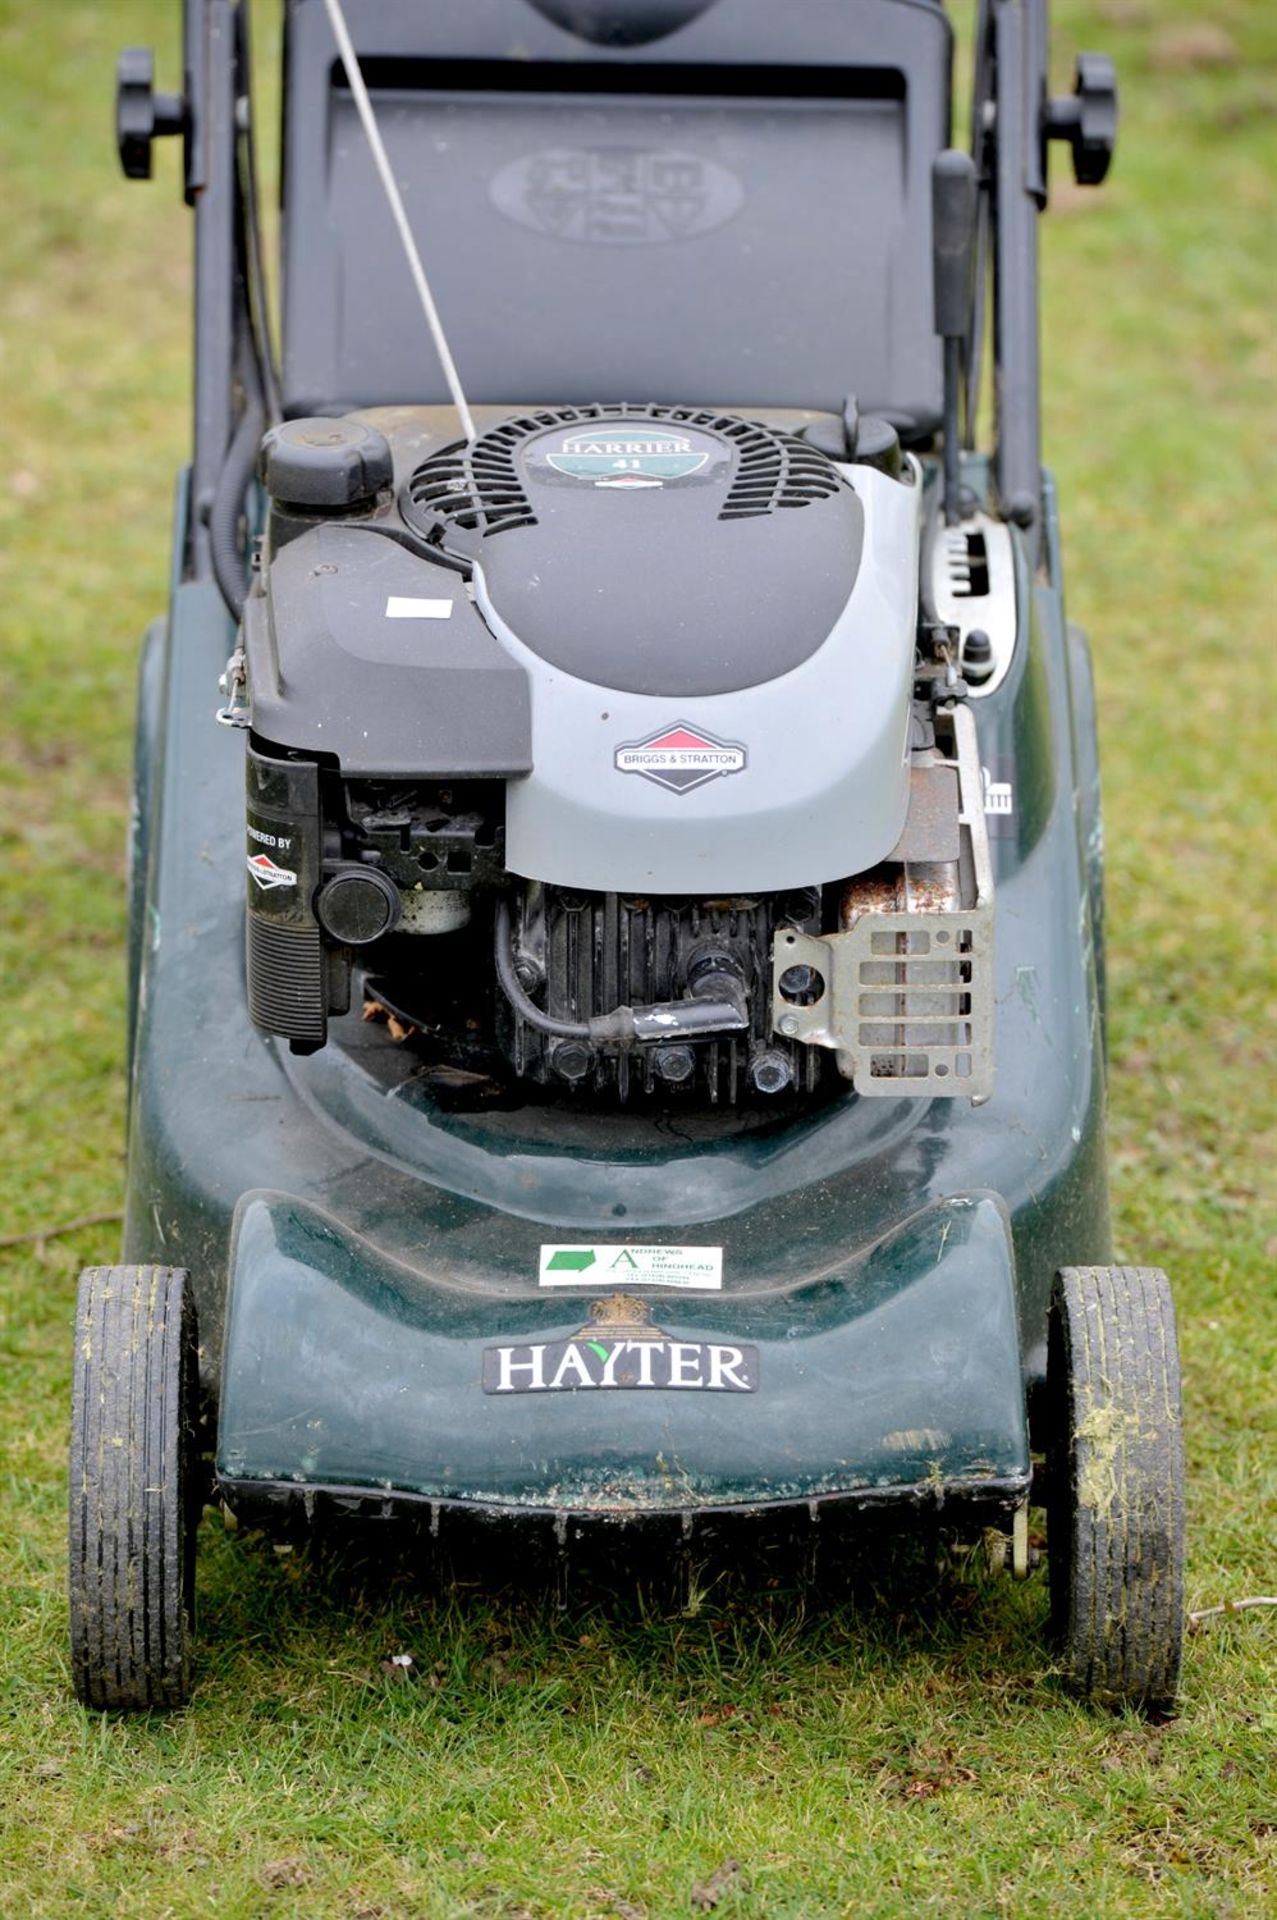 Hayter Harrier 41 lawnmower, Briggs & Stratton Lawn Mowers, purchased from Andrews of Hindhead - Image 4 of 9